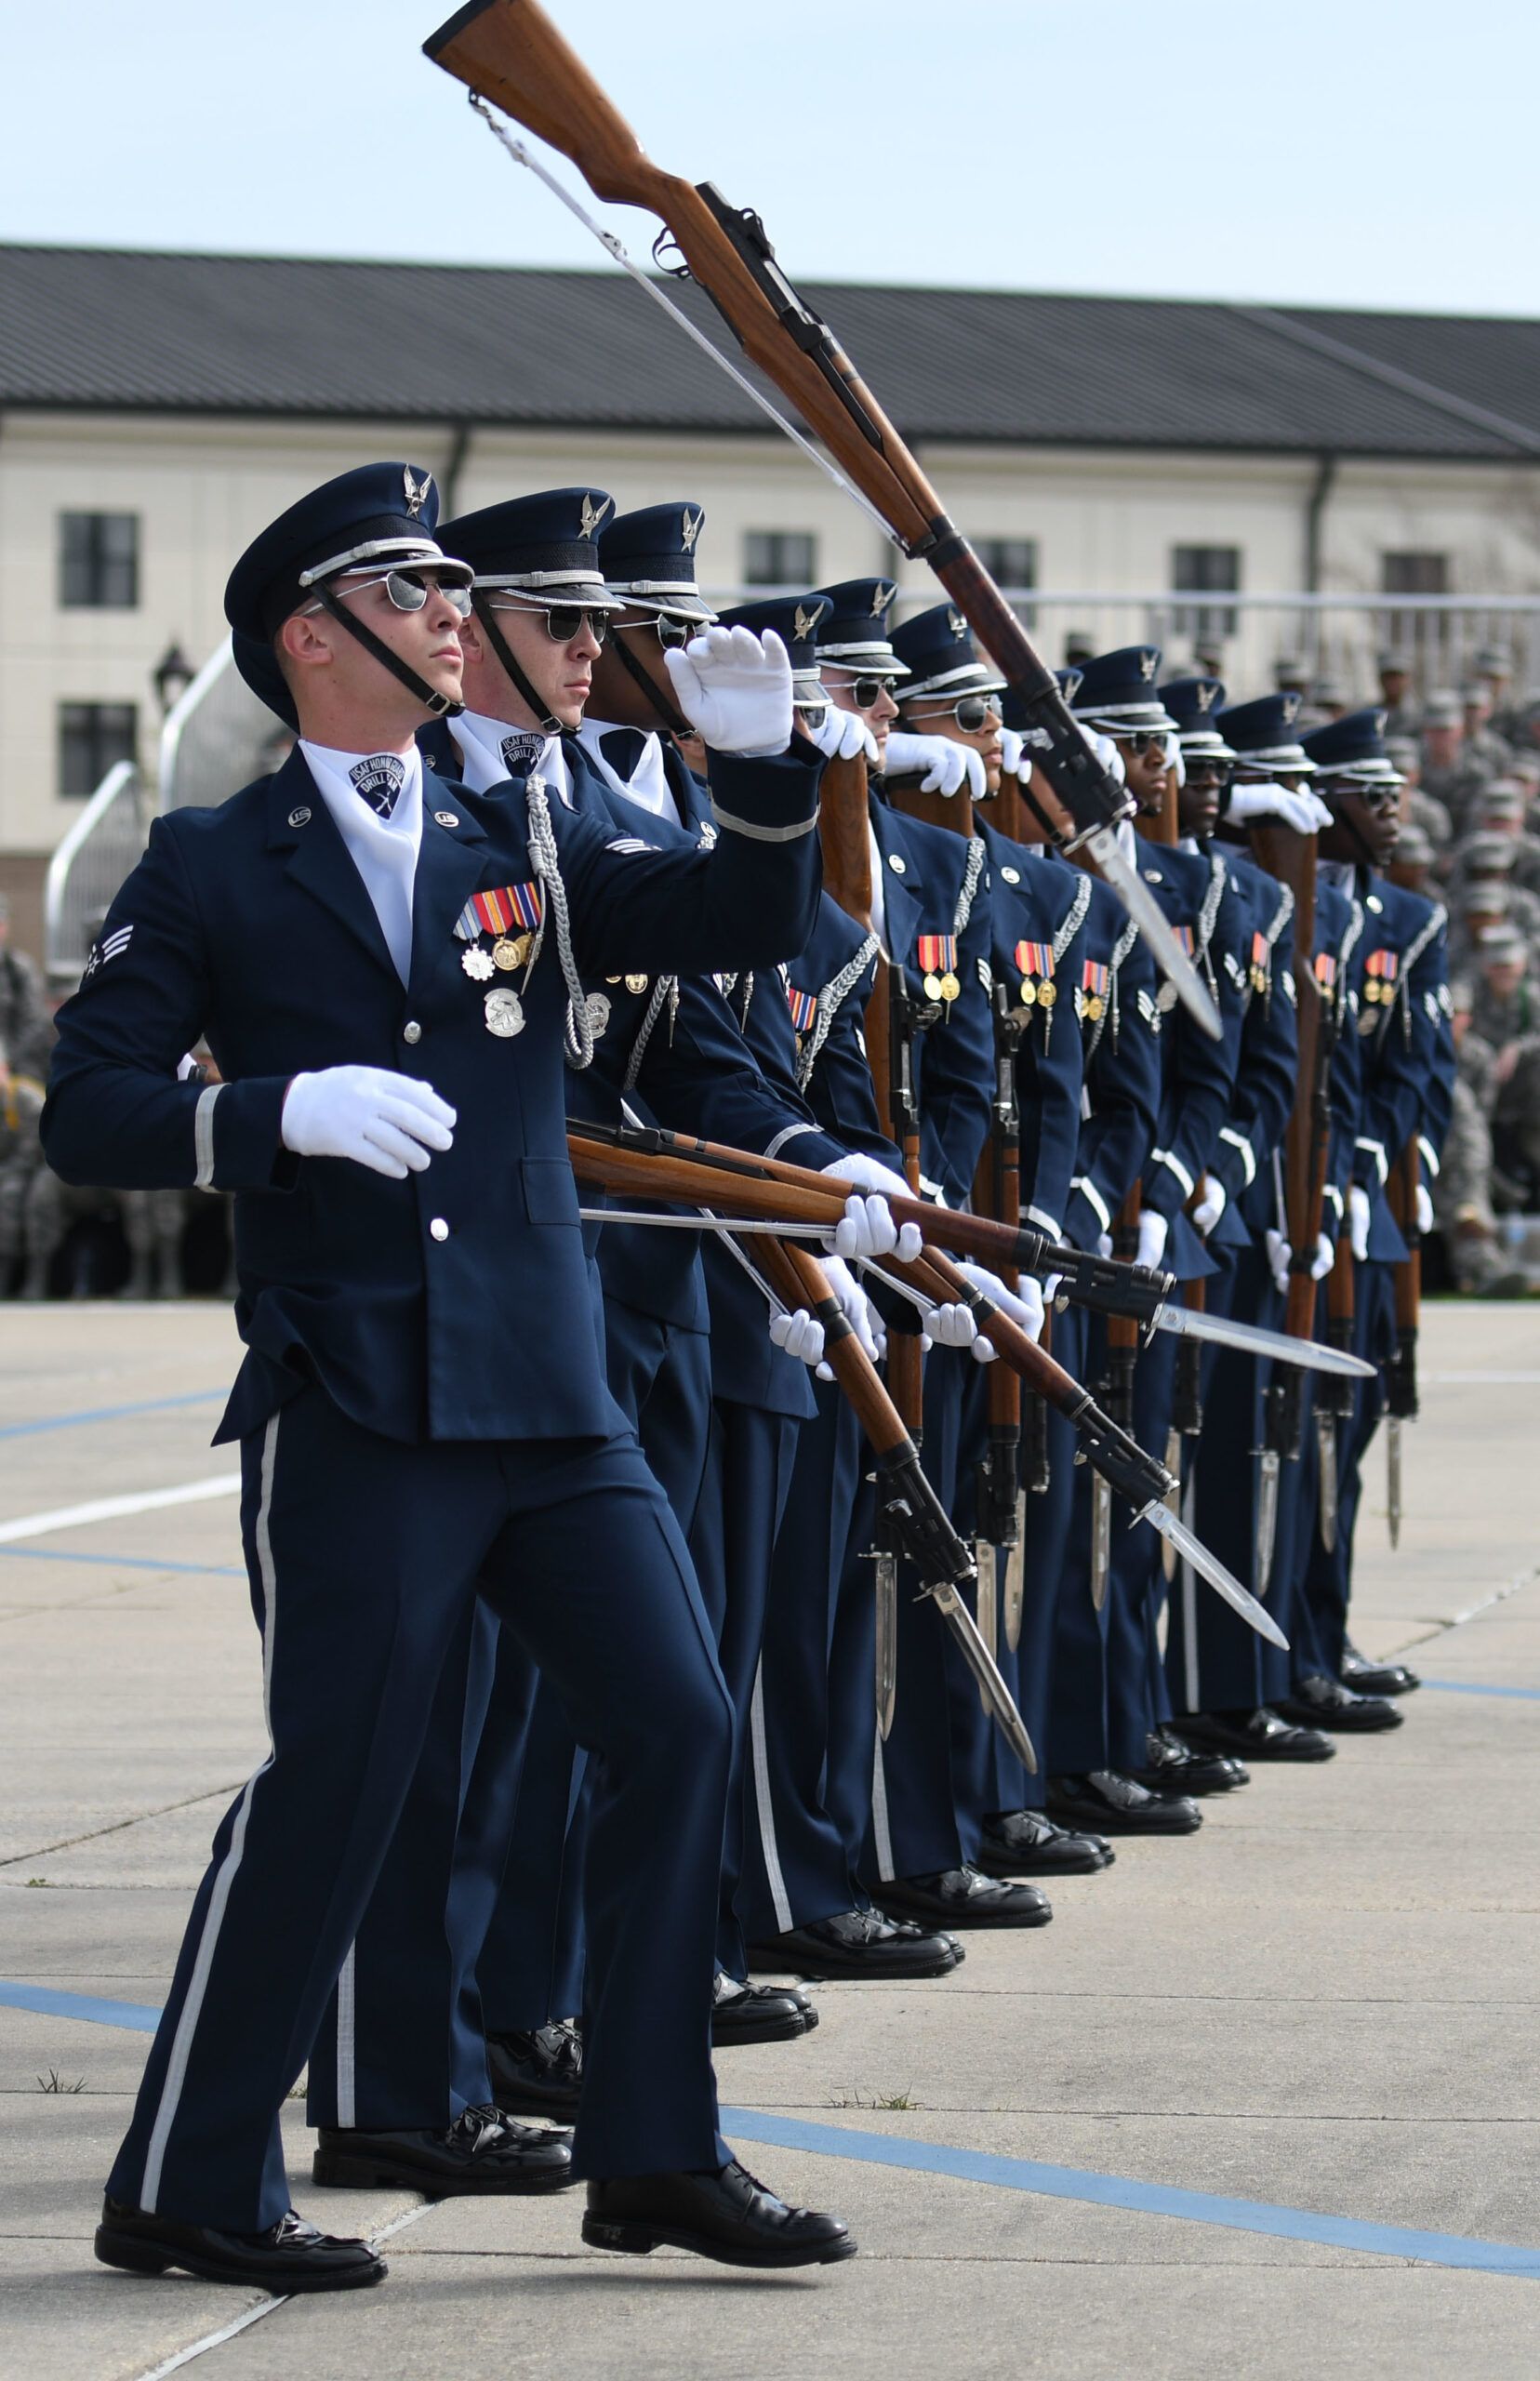 The US Air Force Honor Guard Drill Team shows off skill and precision with rifle drill demonstration.